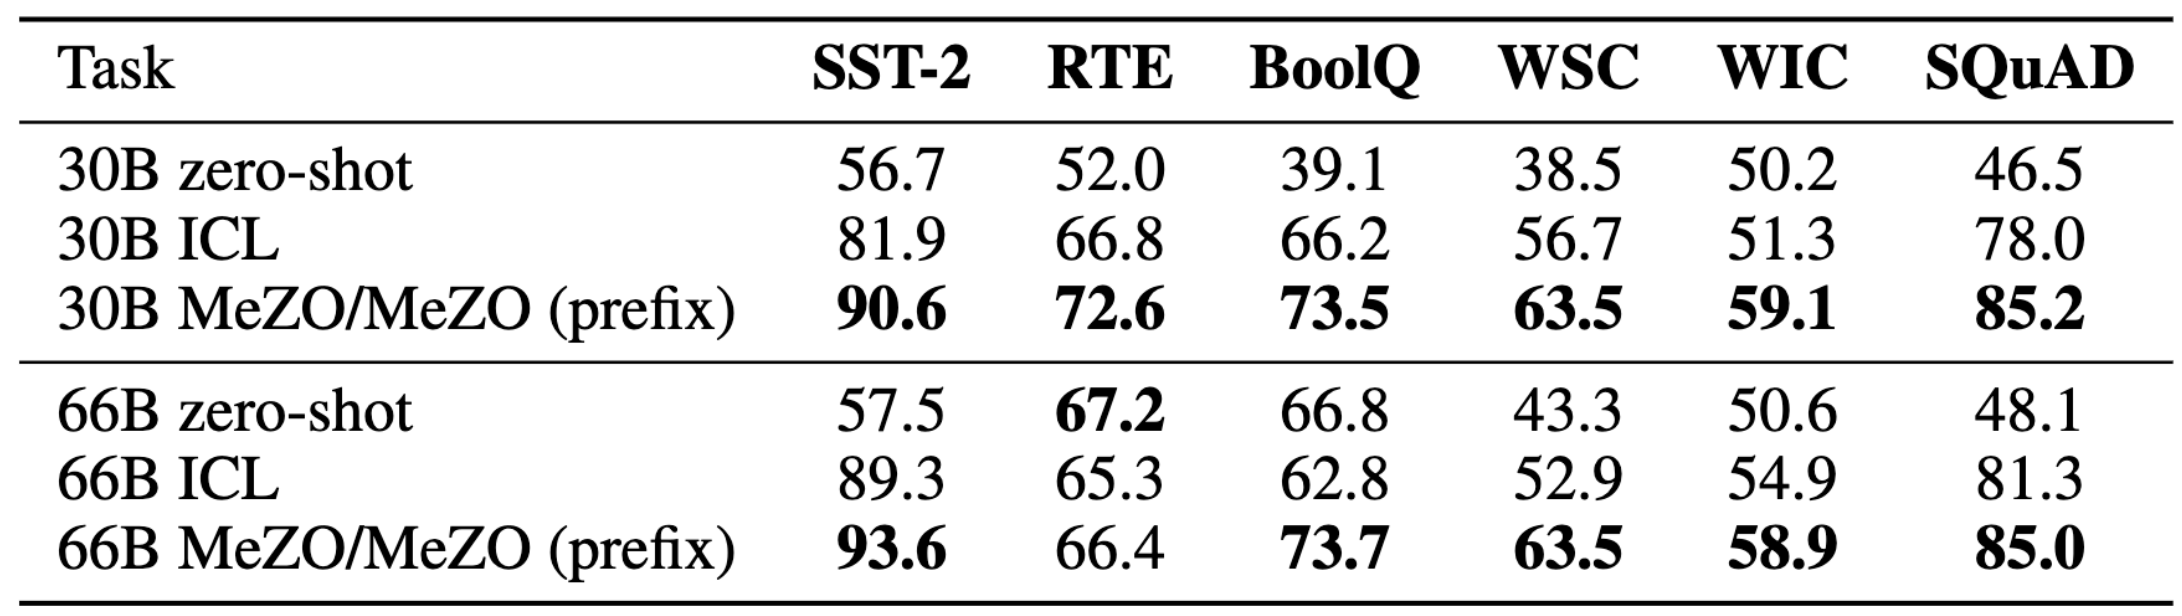 Table 2 Experiments performed on OPT-30B and OPT-66B